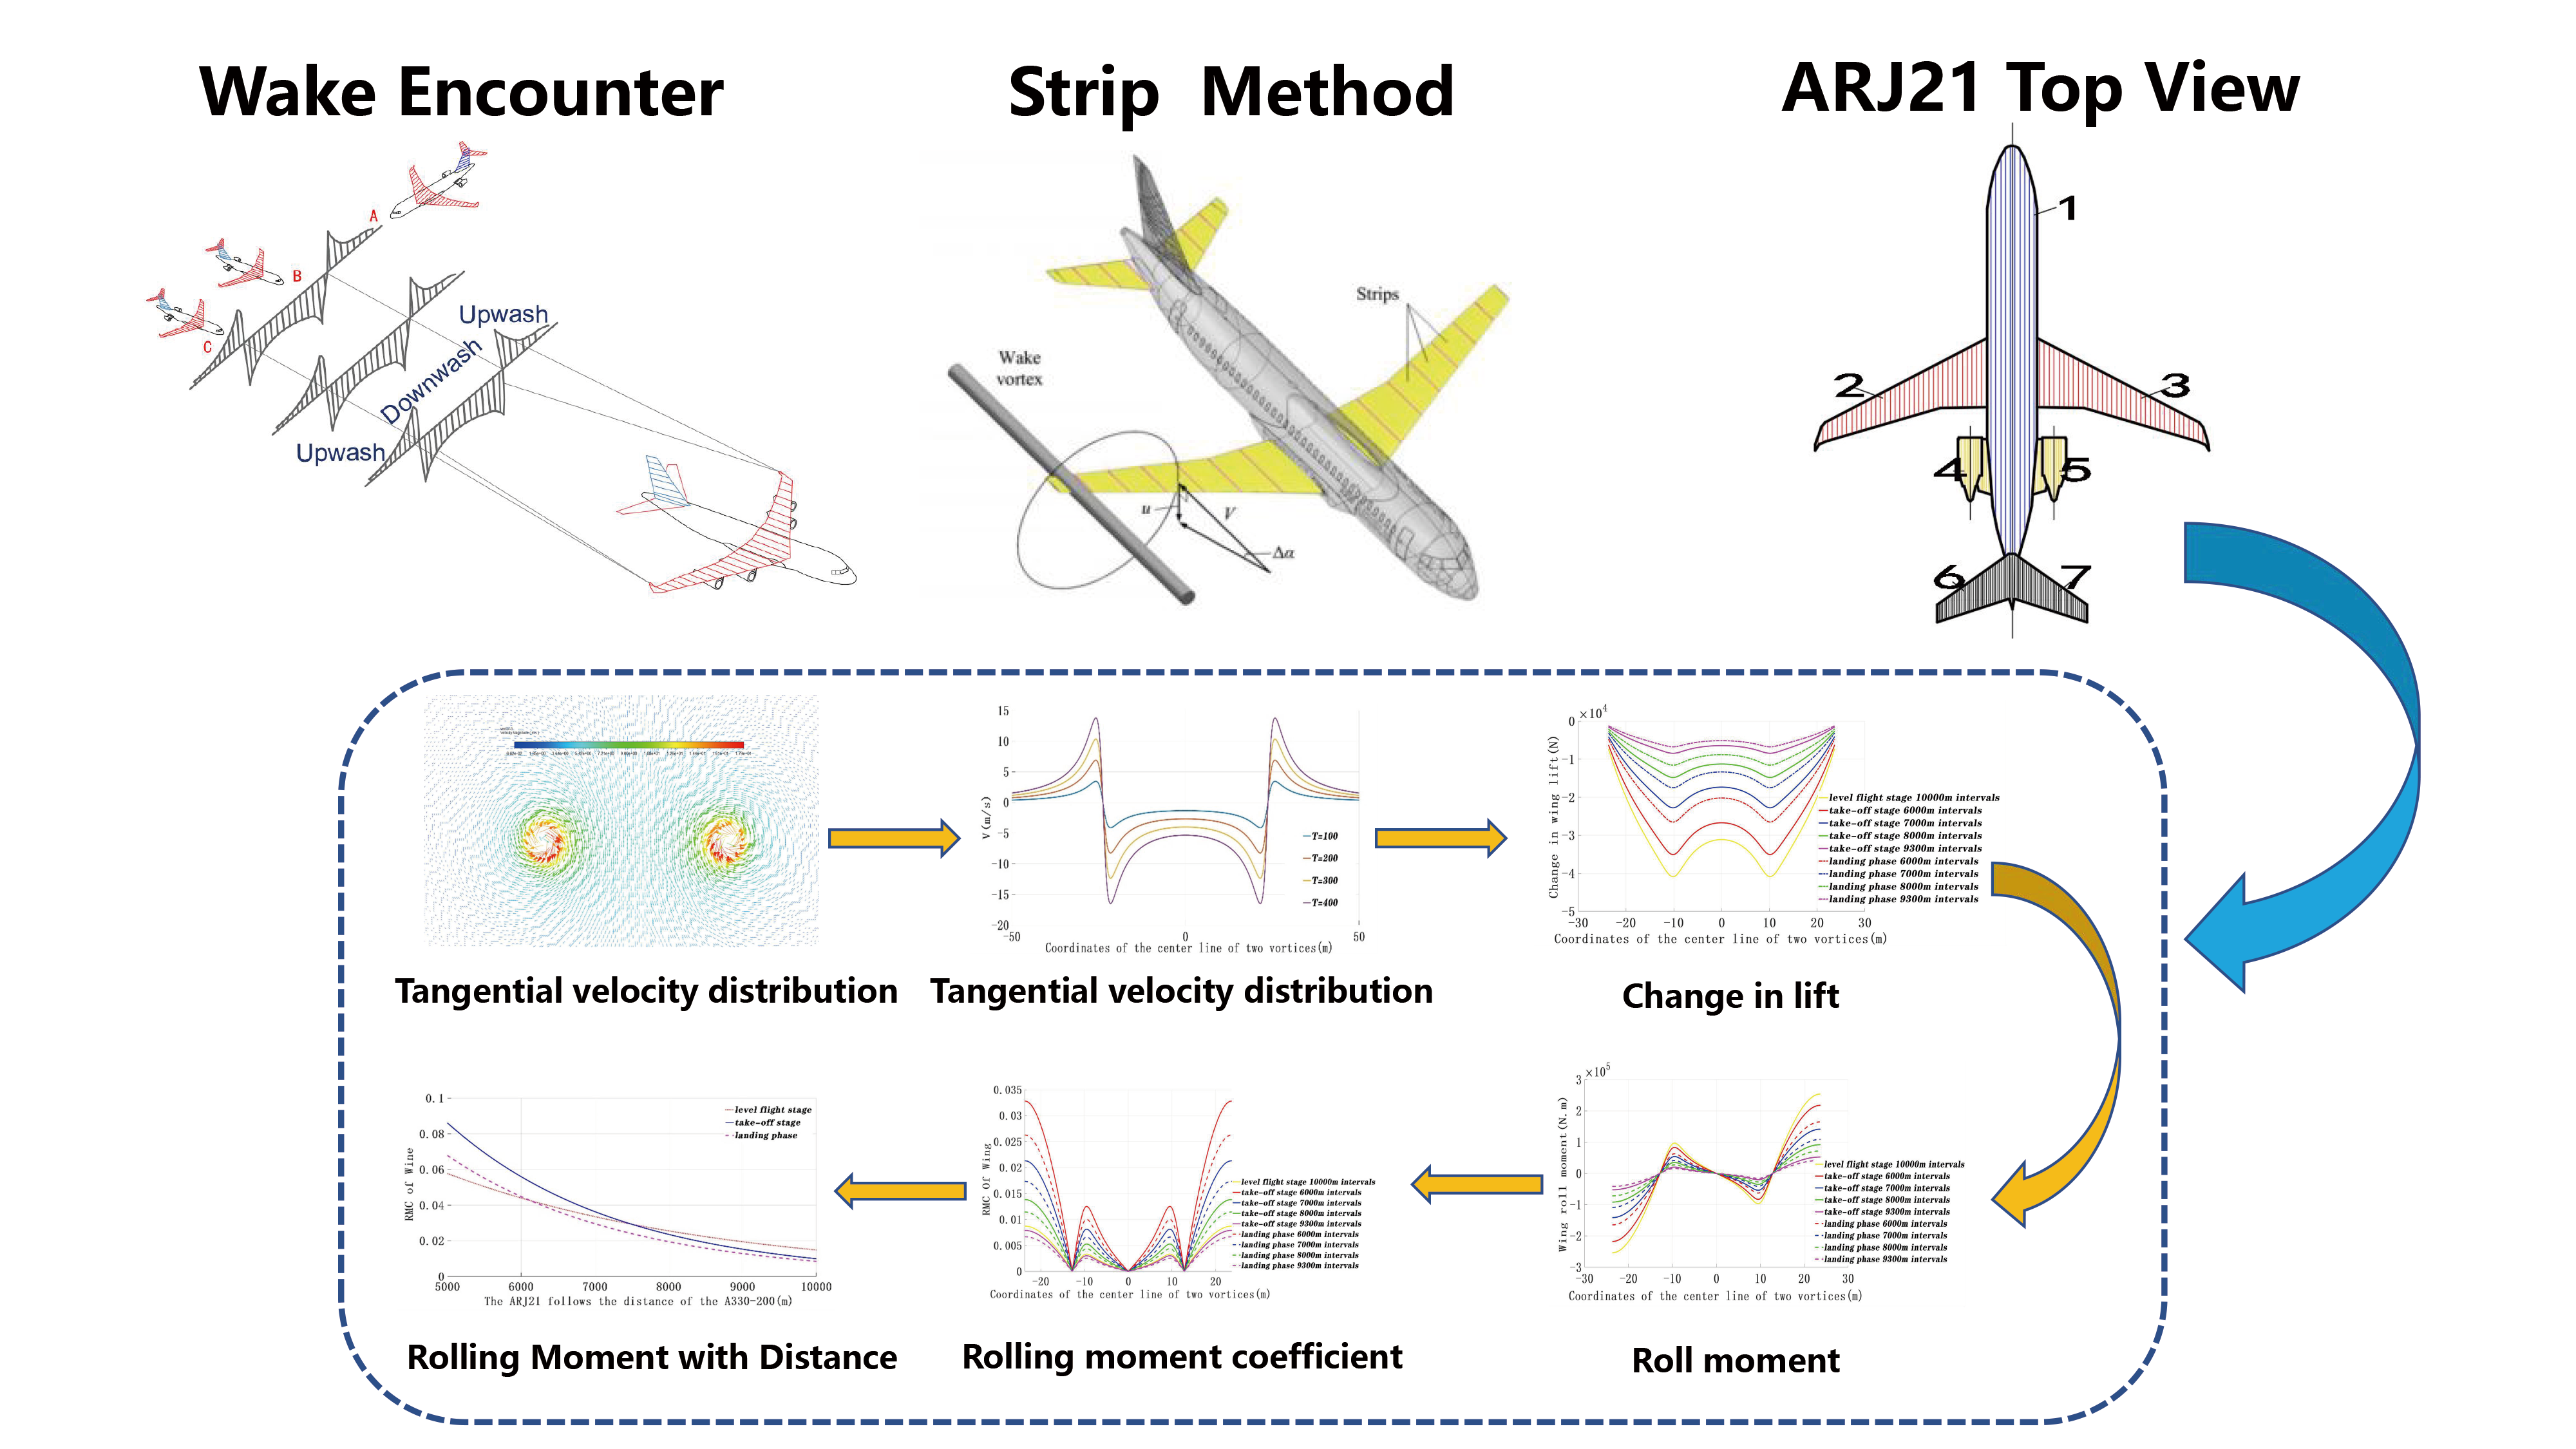 Study on the Influence of a Wake Vortex on an ARJ21 Aircraft Using the Strip Method